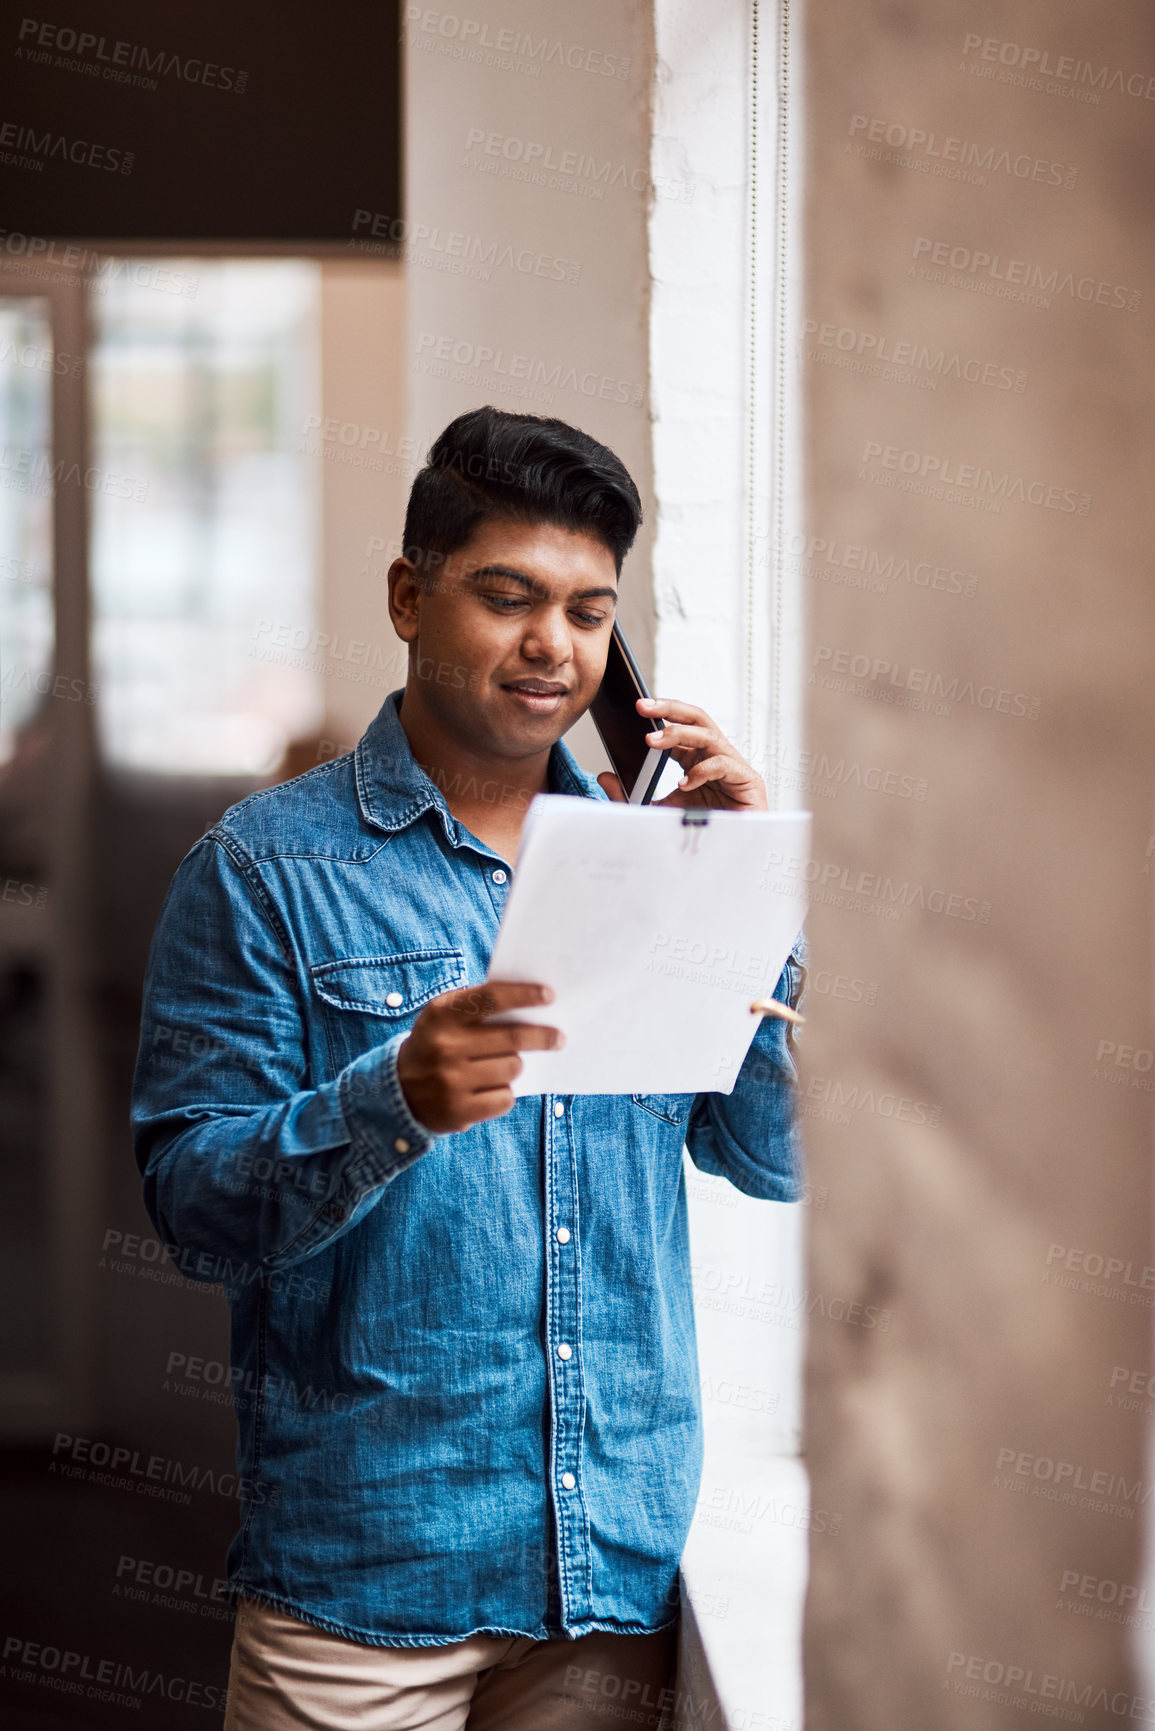 Buy stock photo Shot of a man talking on his cellphone while looking at paperwork